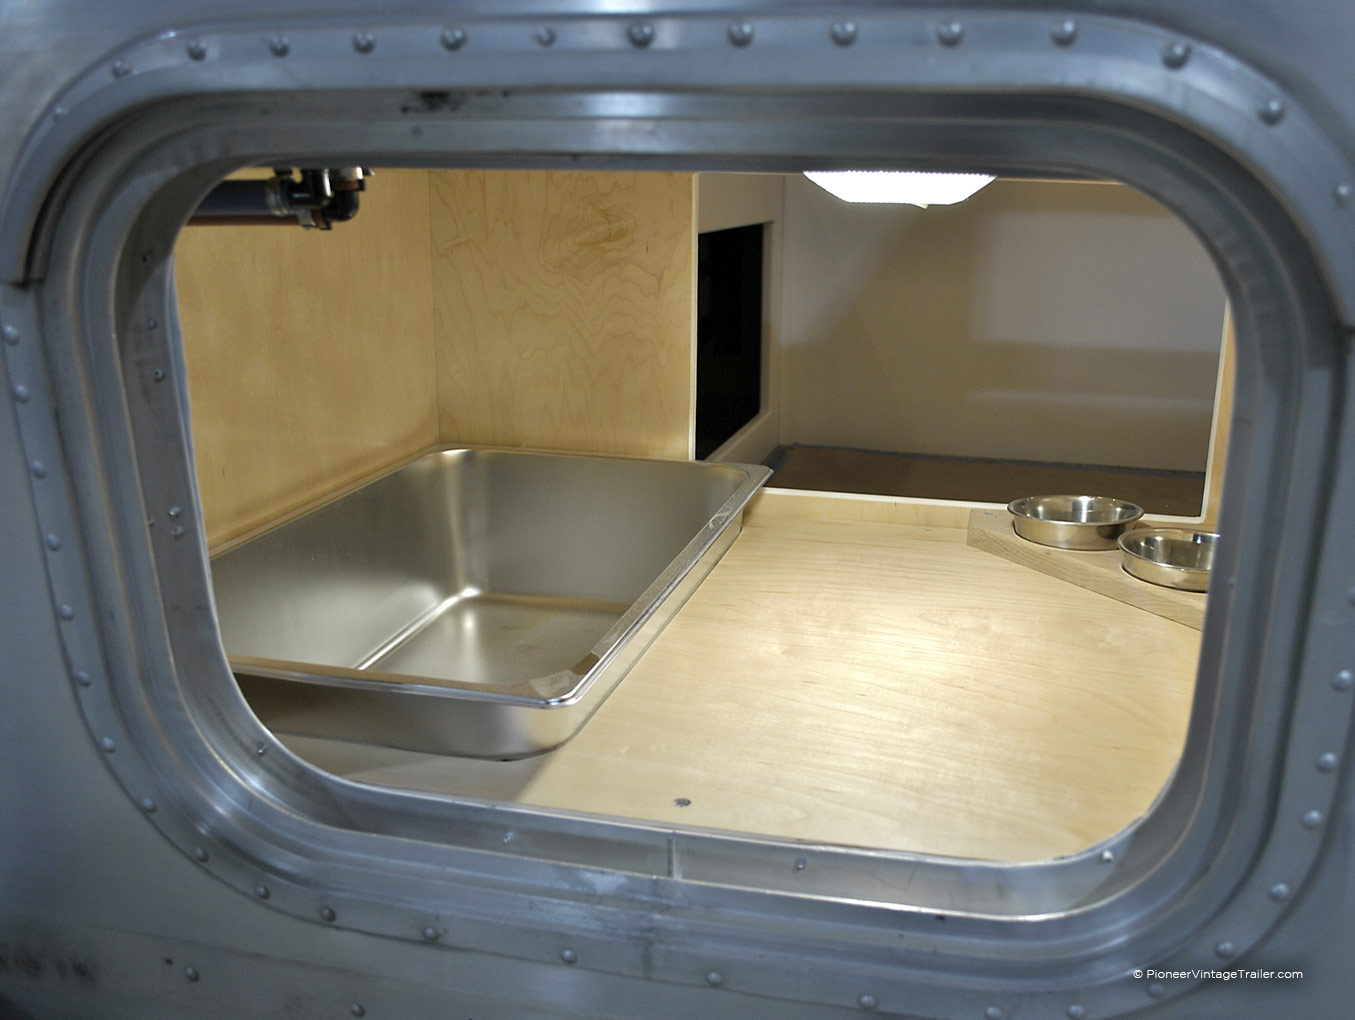 1969 Airstream Overlander cat litterbox view from outside access